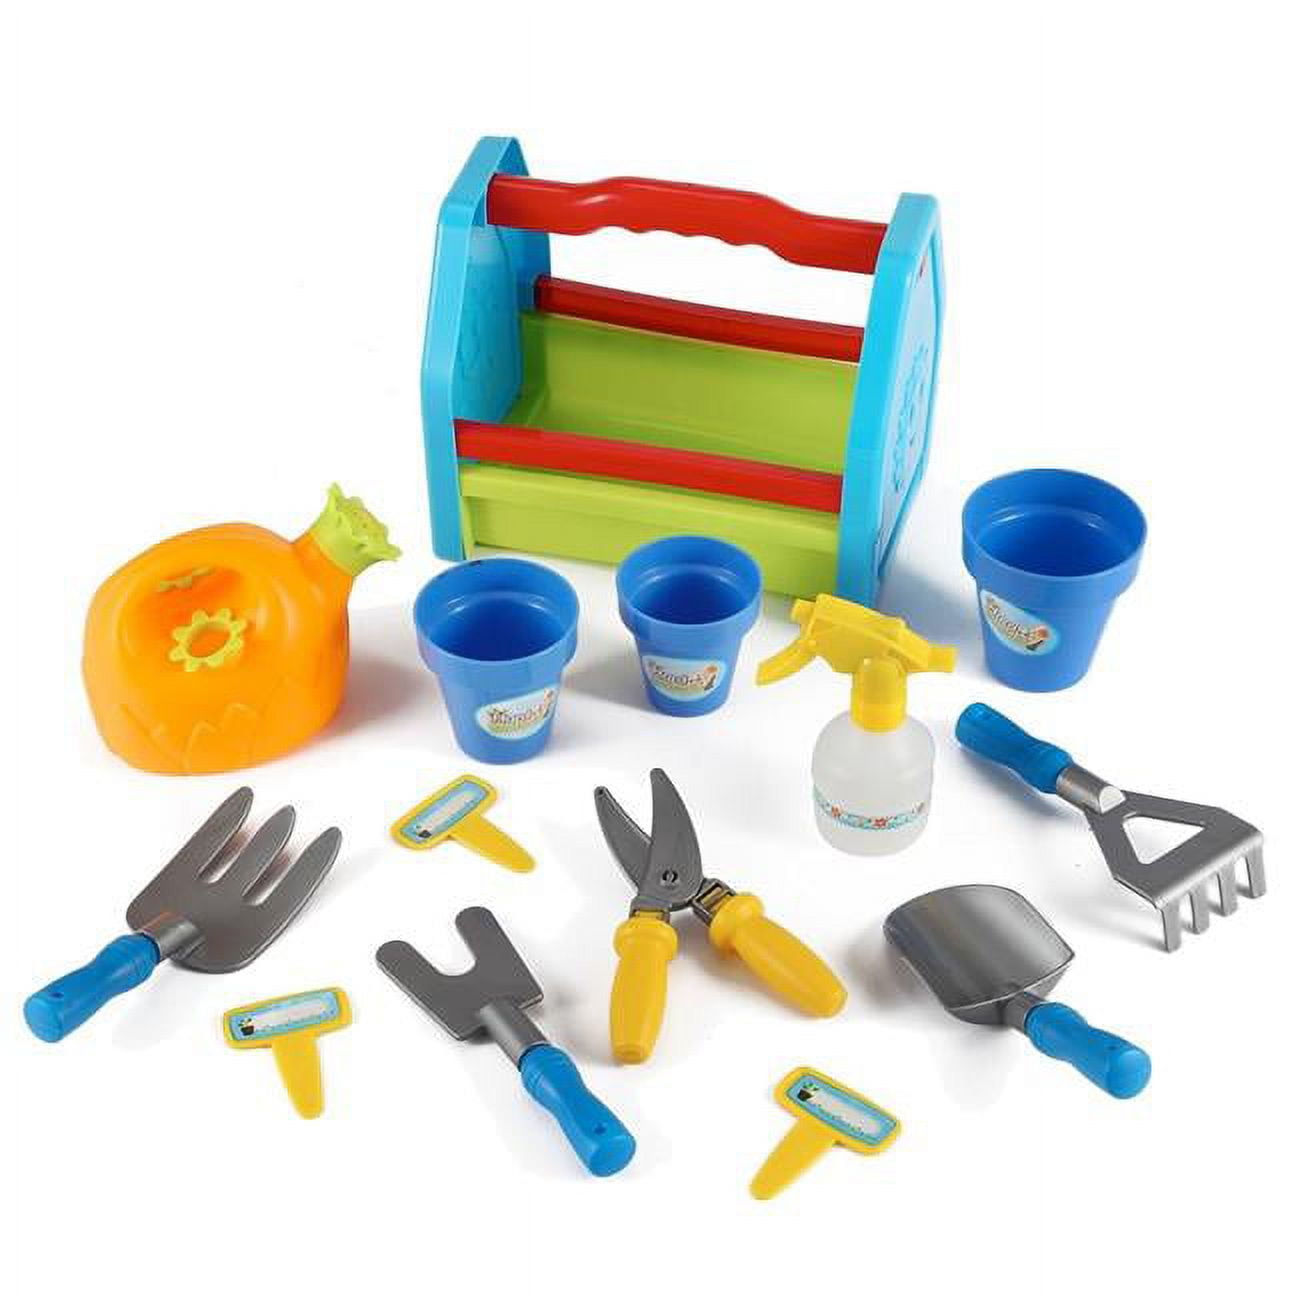 Ps391 Rainbow Gardening 14 Piece Box Tools Toy Set For Kids